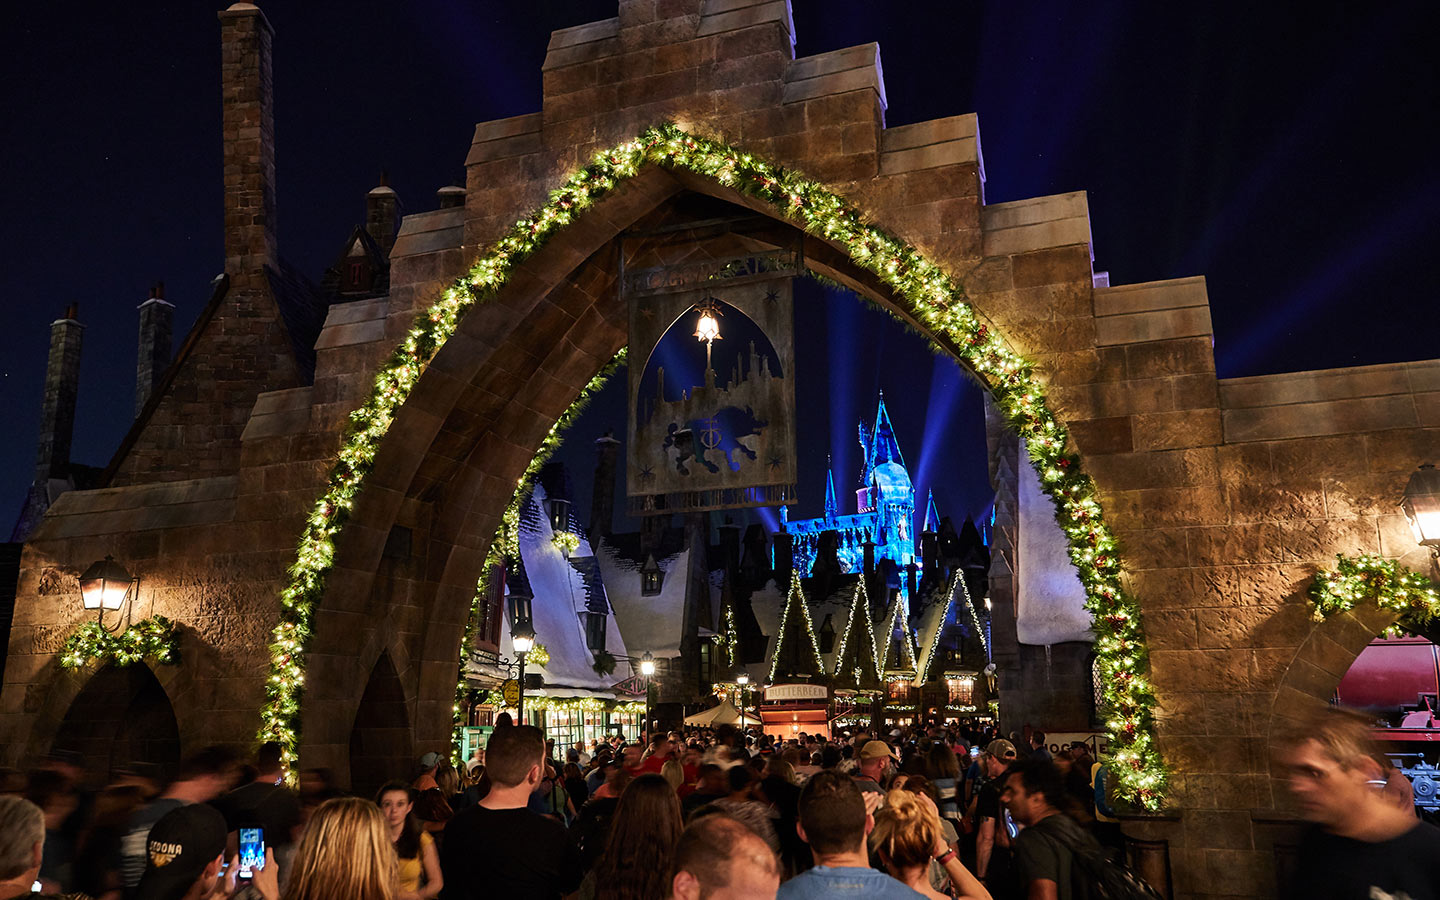 Entrance to Hogsmeade at the Wizarding World of Harry Potter